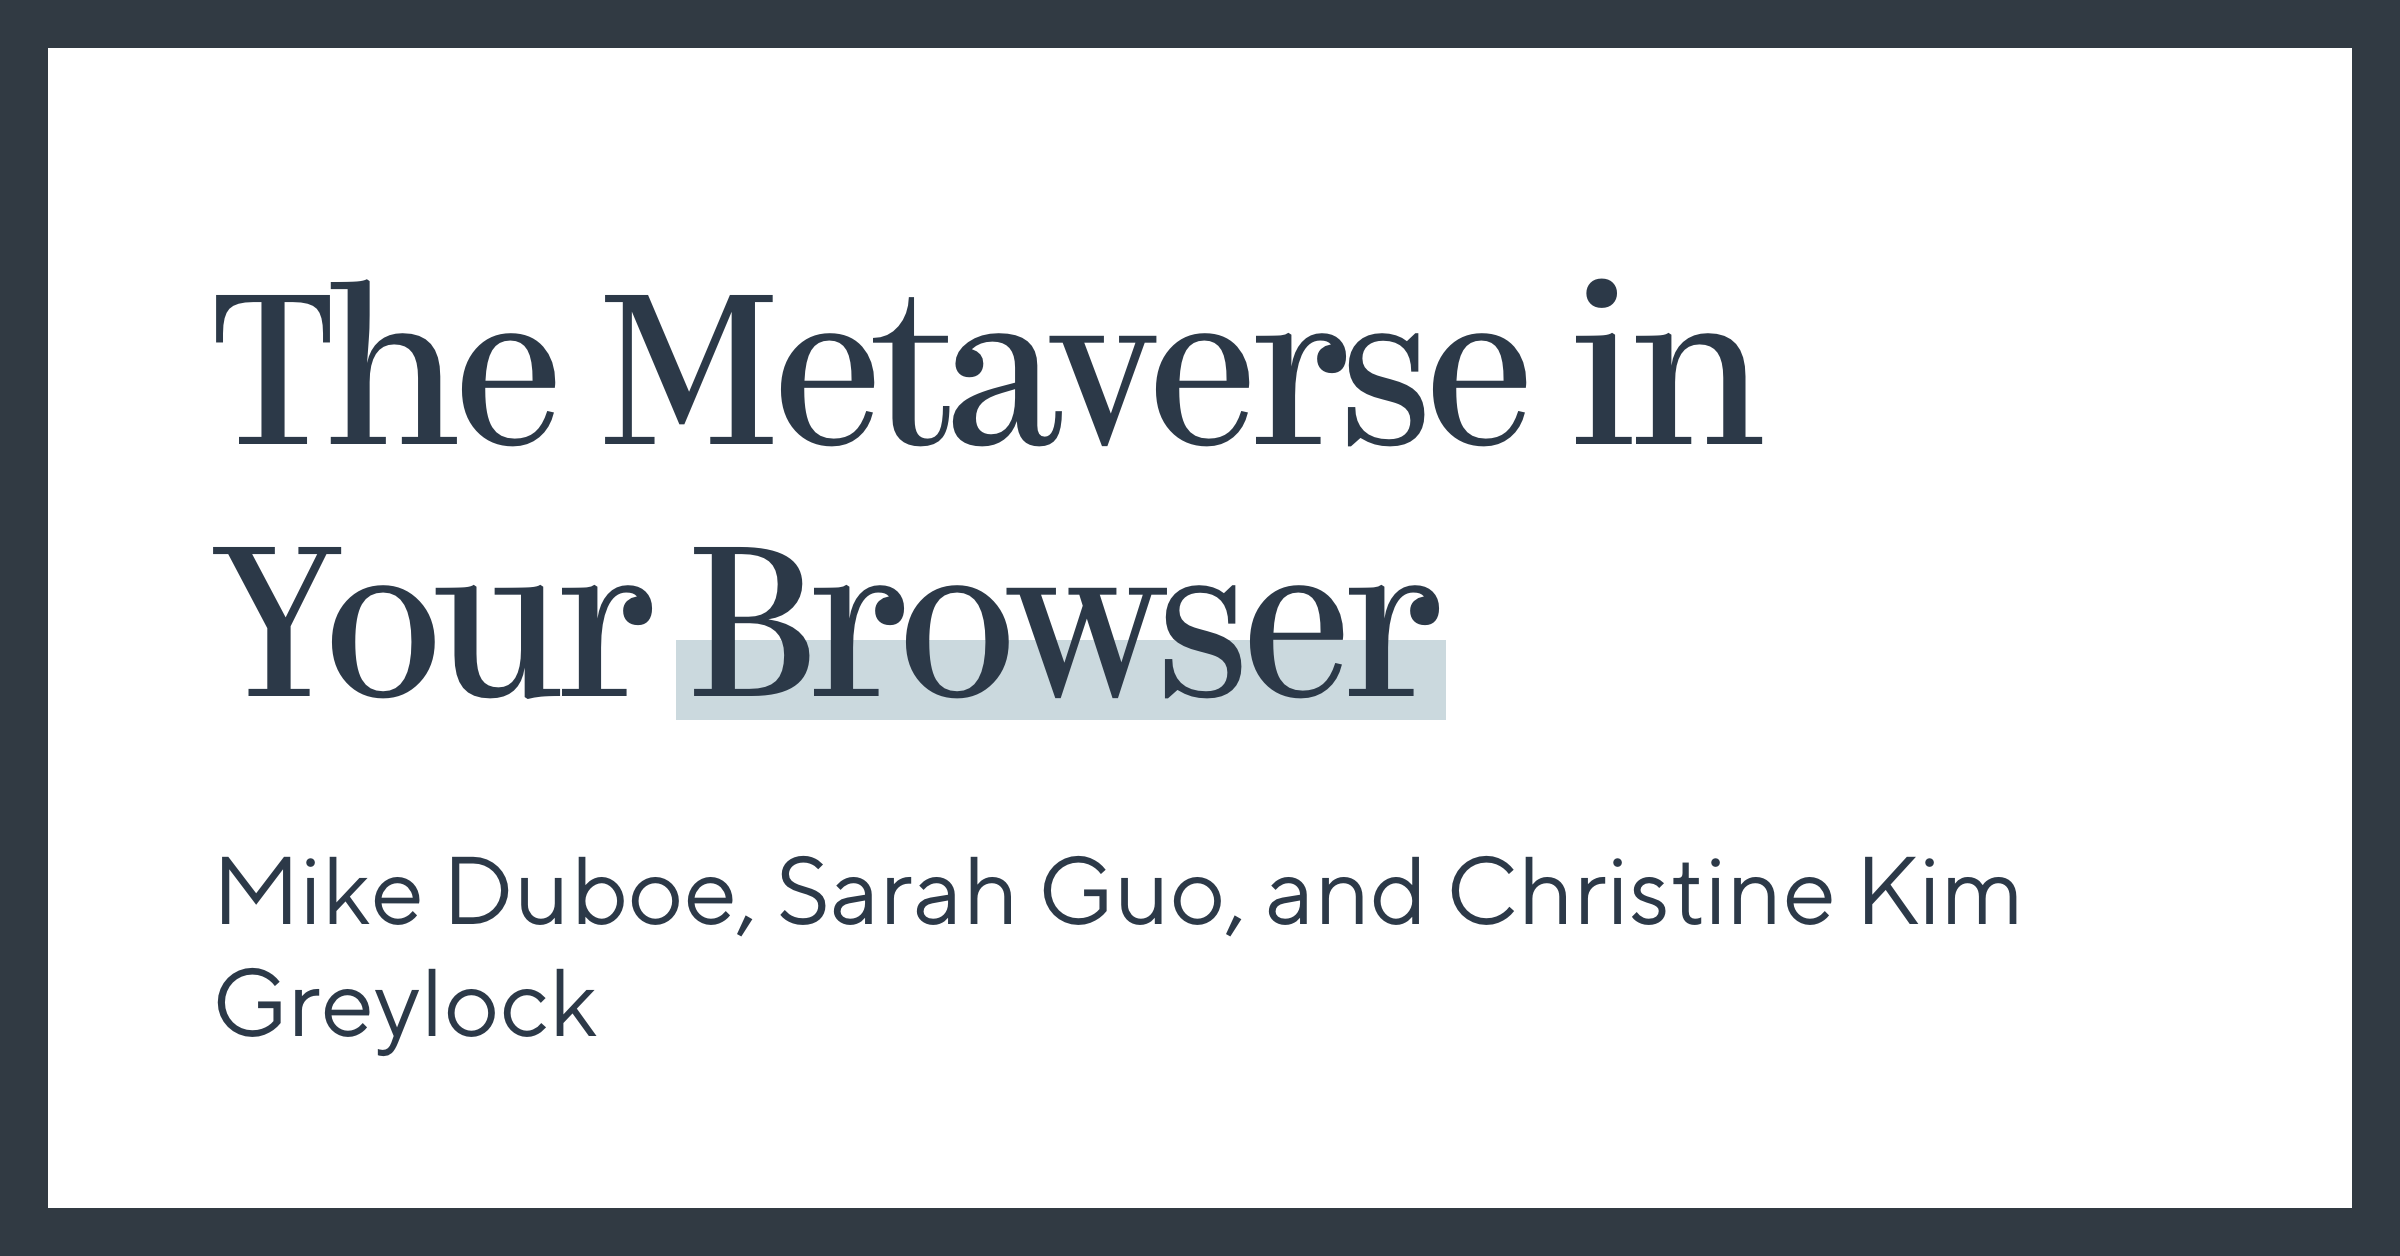 The Metaverse In Your Browser